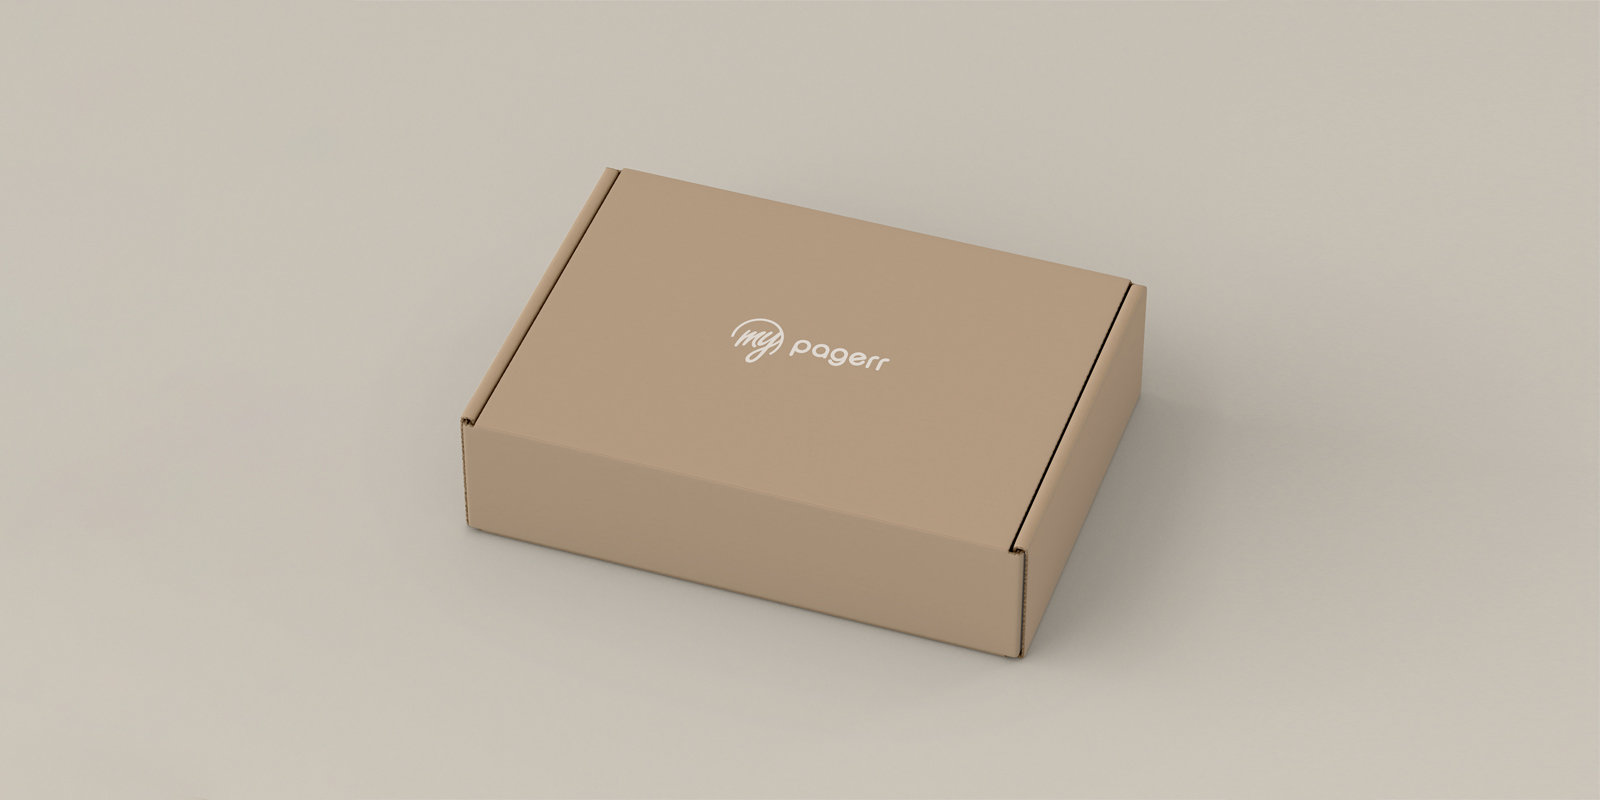 Bespoke boxes in Rockhampton - Print with Pagerr